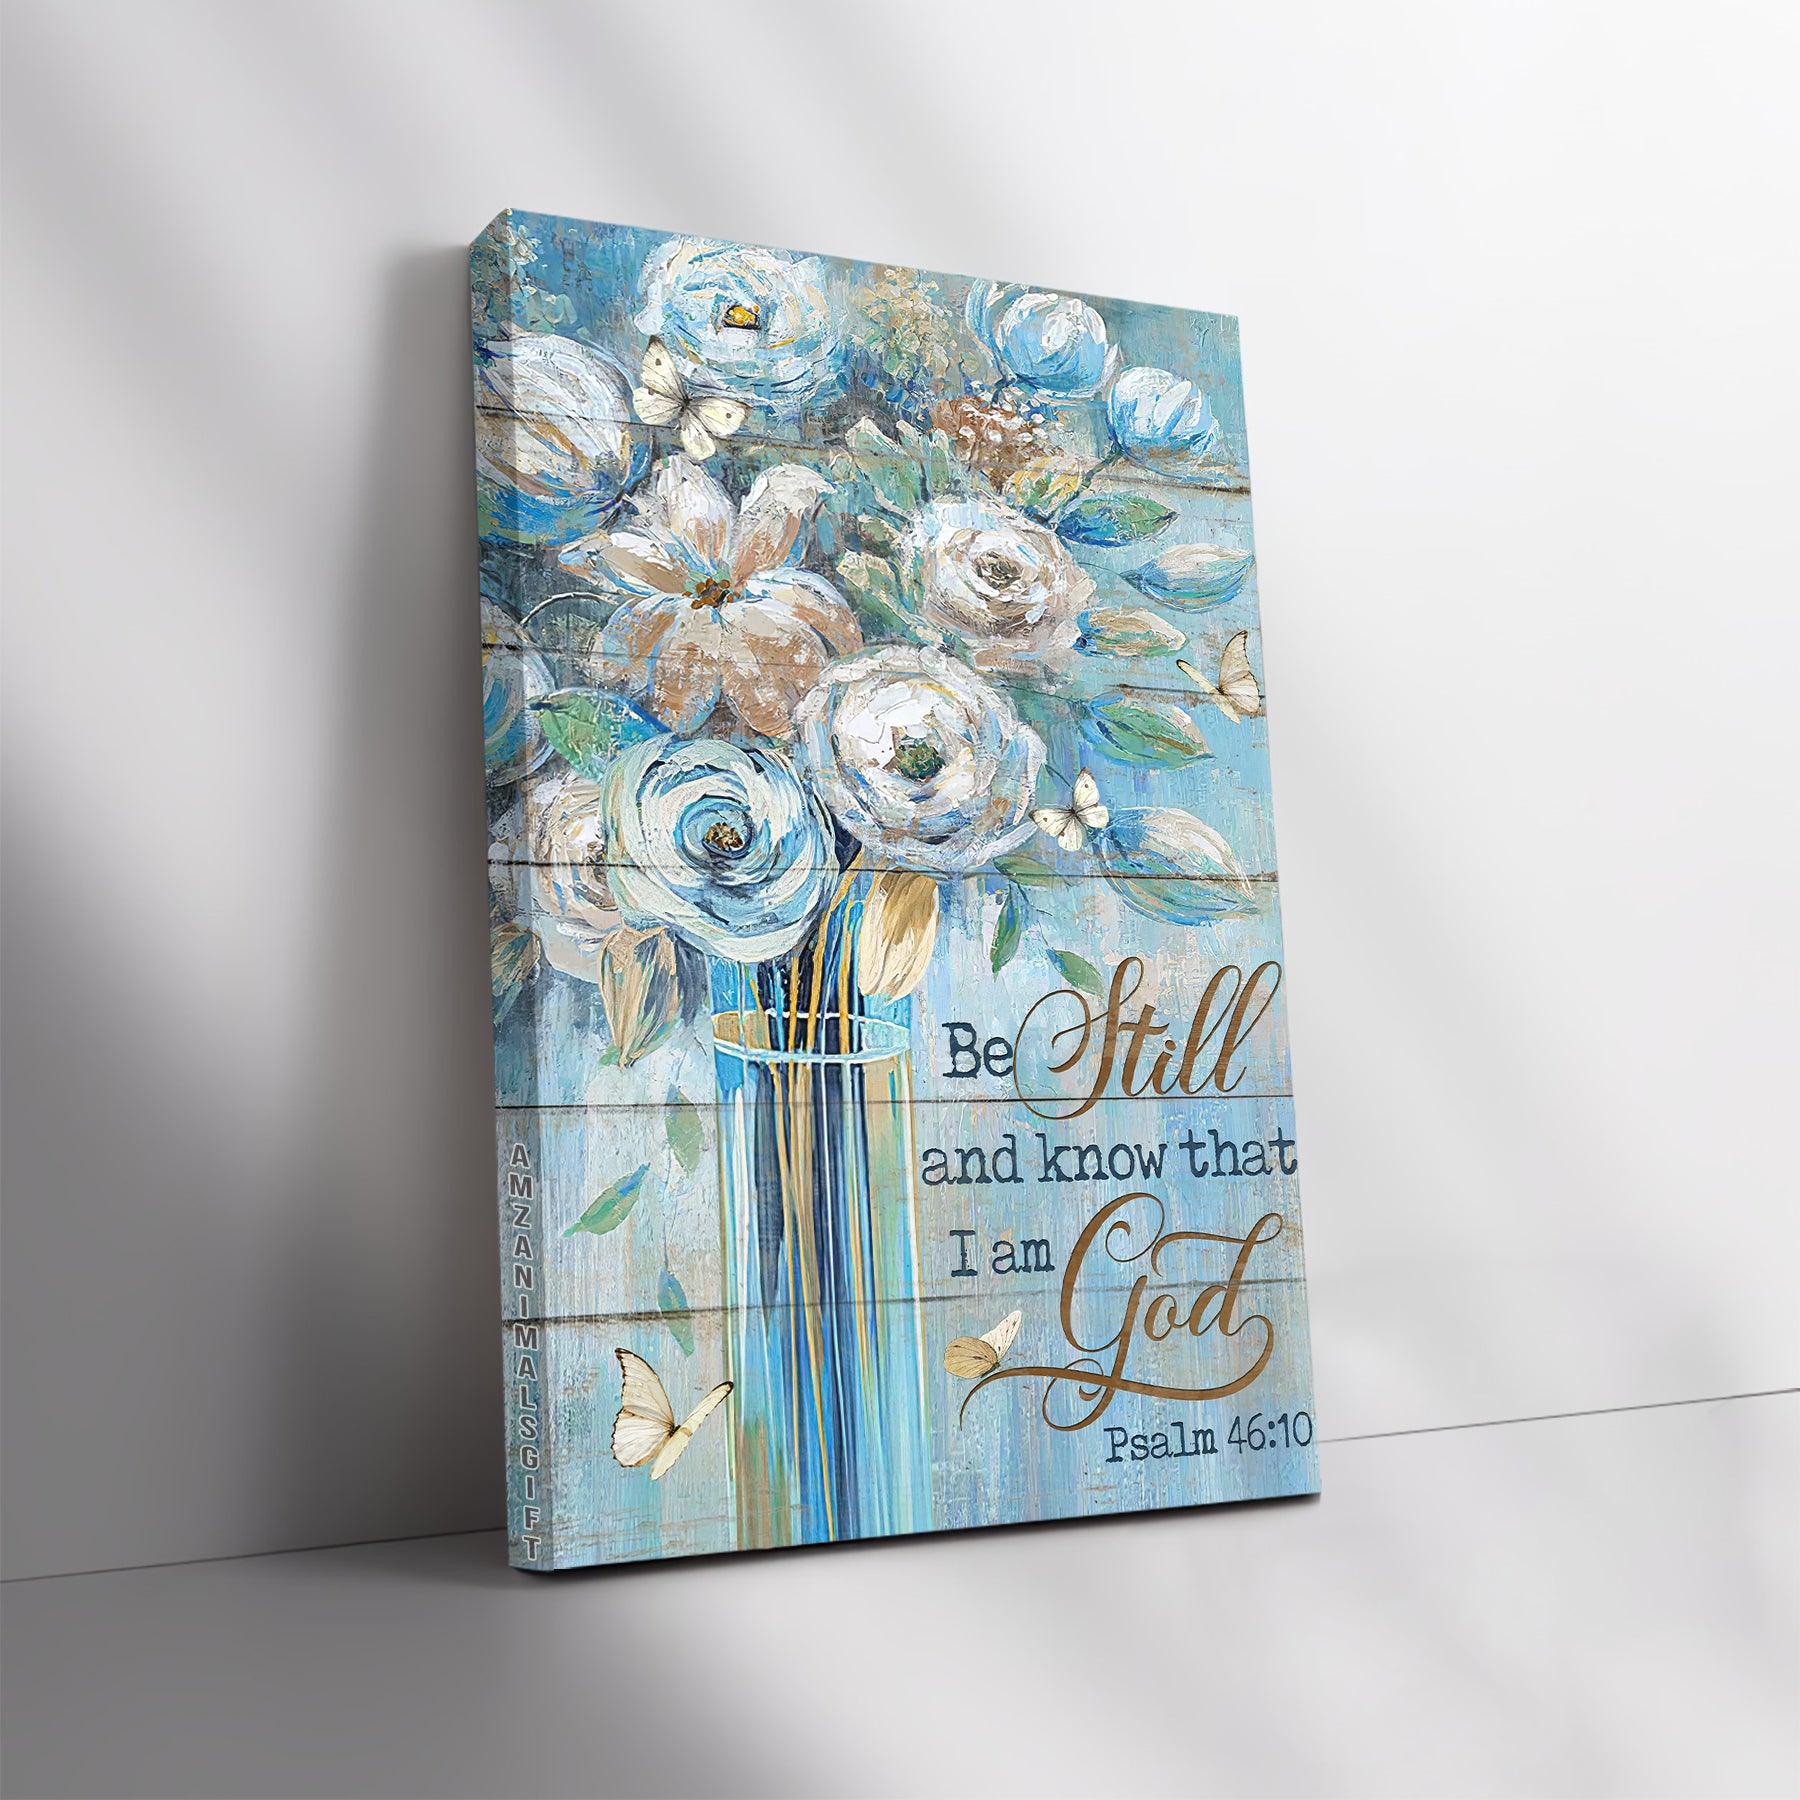 Jesus Portrait Premium Wrapped Canvas - Pretty flower painting, White butterfly, Bible verse, Be still & know that I am God - Gift for Christian - Amzanimalsgift